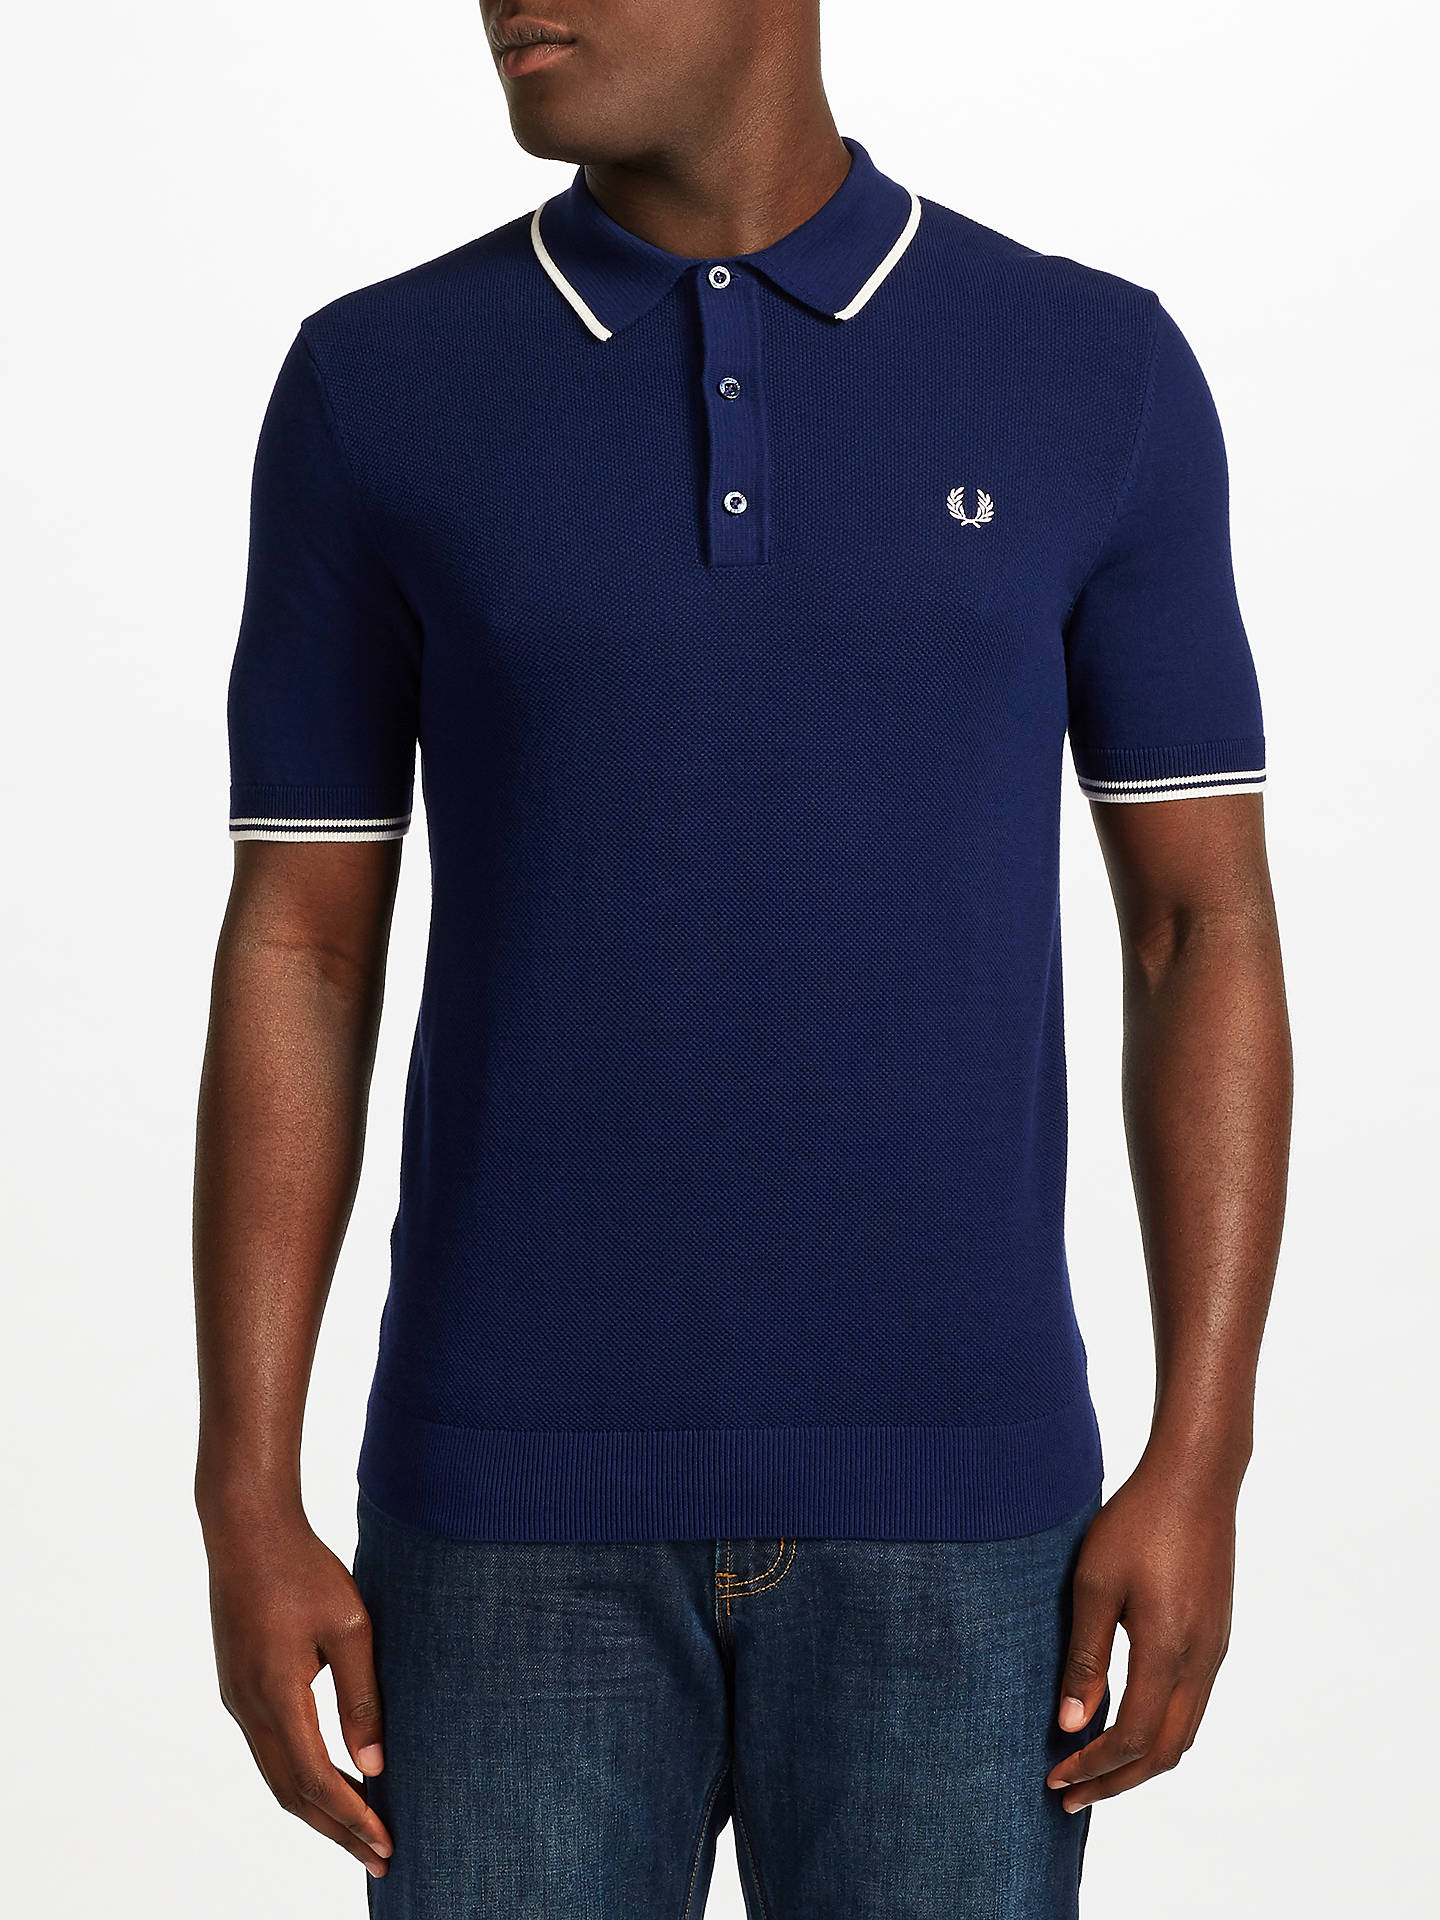 Fred Perry Tipped Knit Polo Shirt, Rich Navy at John Lewis & Partners